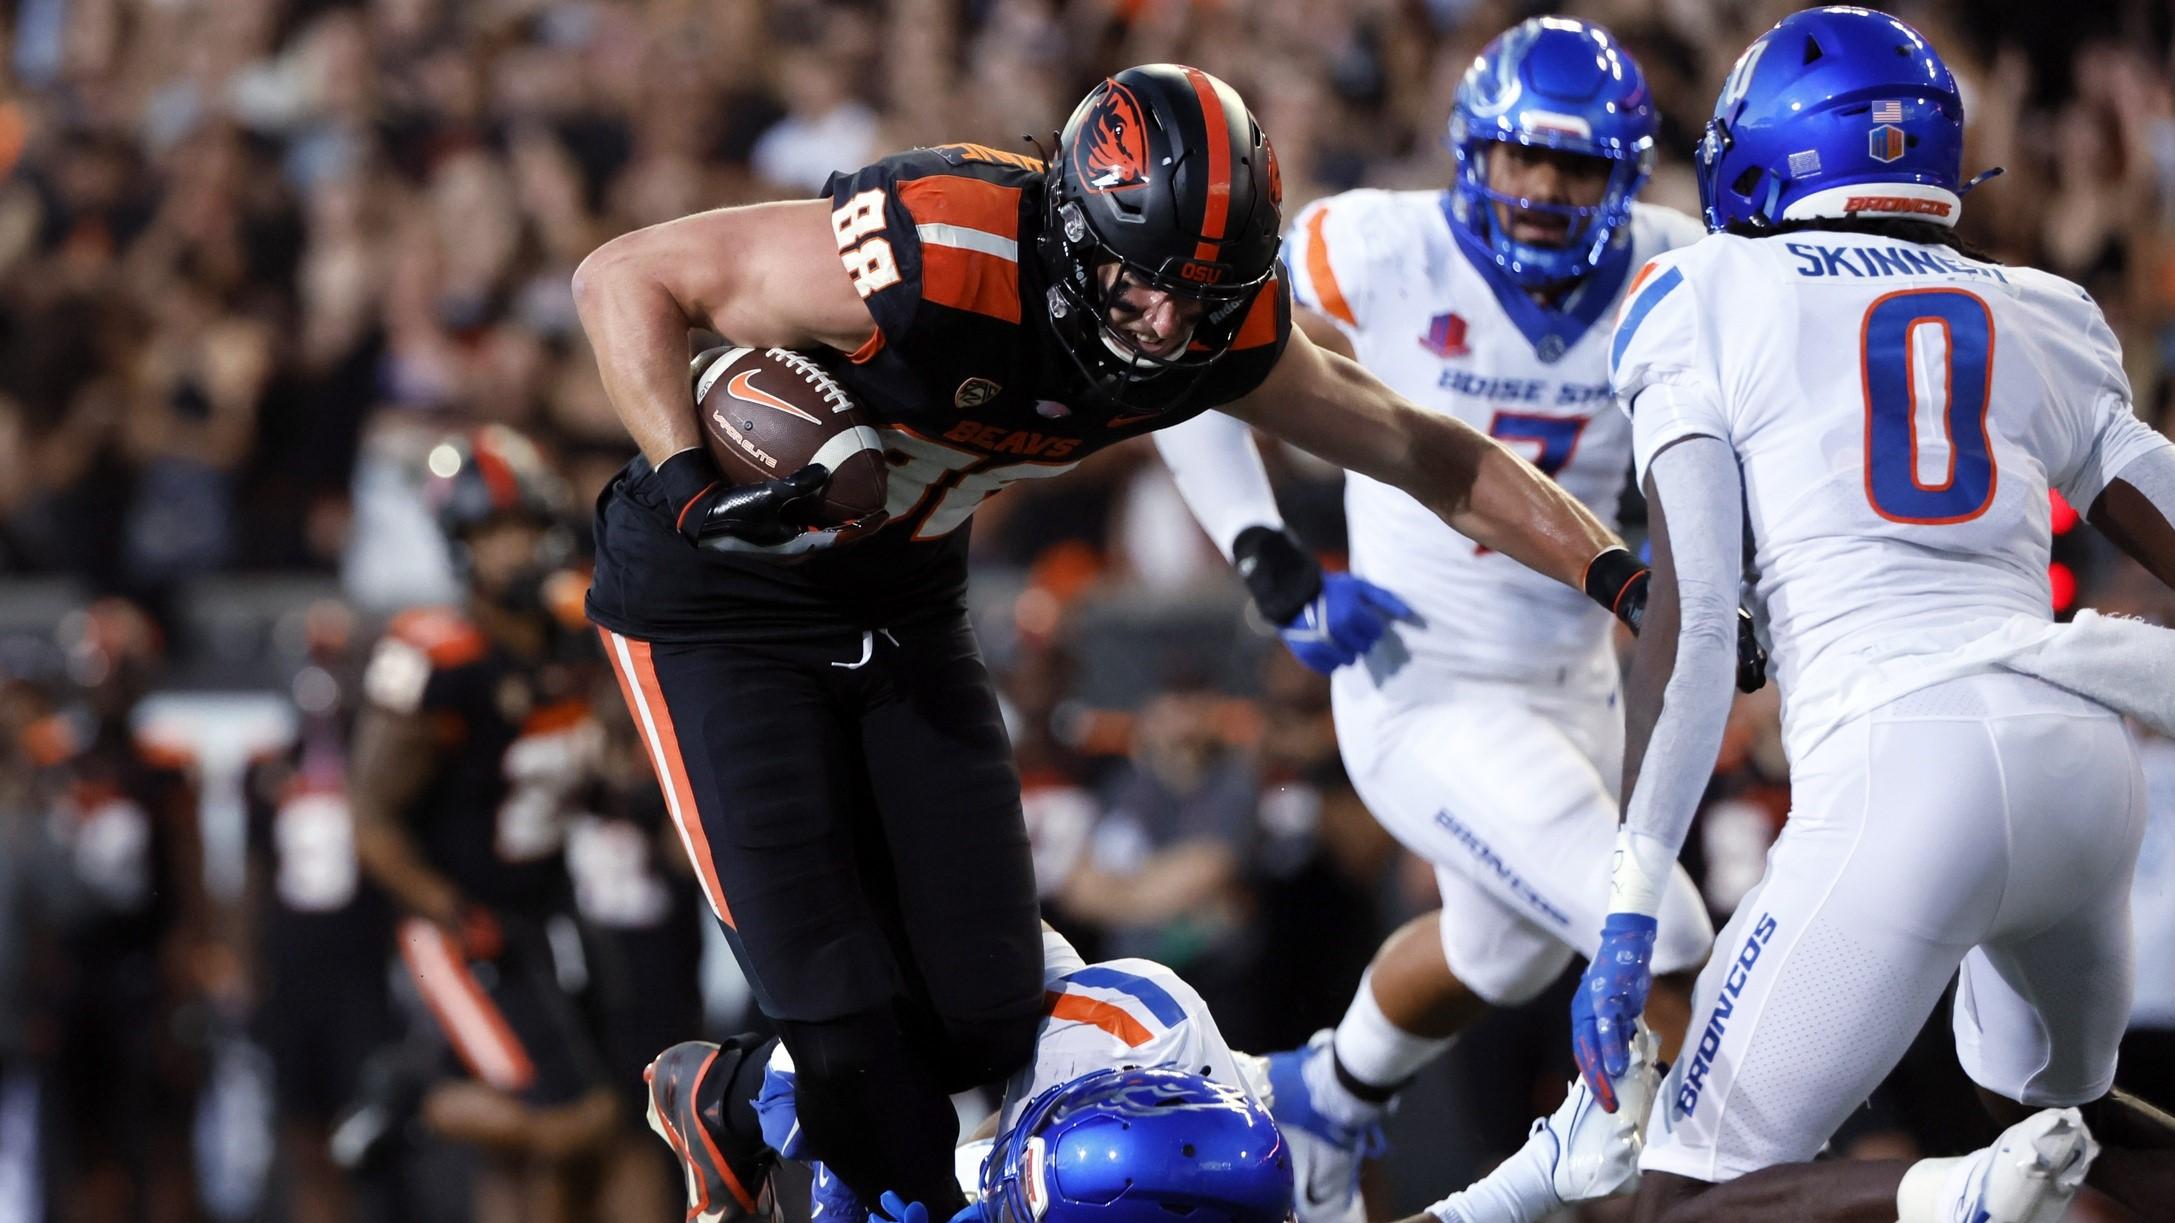 Sep 3, 2022; Corvallis, Oregon, USA; Oregon State Beavers tight end Luke Musgrave (88) is tackled by Boise State Broncos safety Rodney Robinson (4) during the first half at Reser Stadium. / Soobum Im-USA TODAY Sports